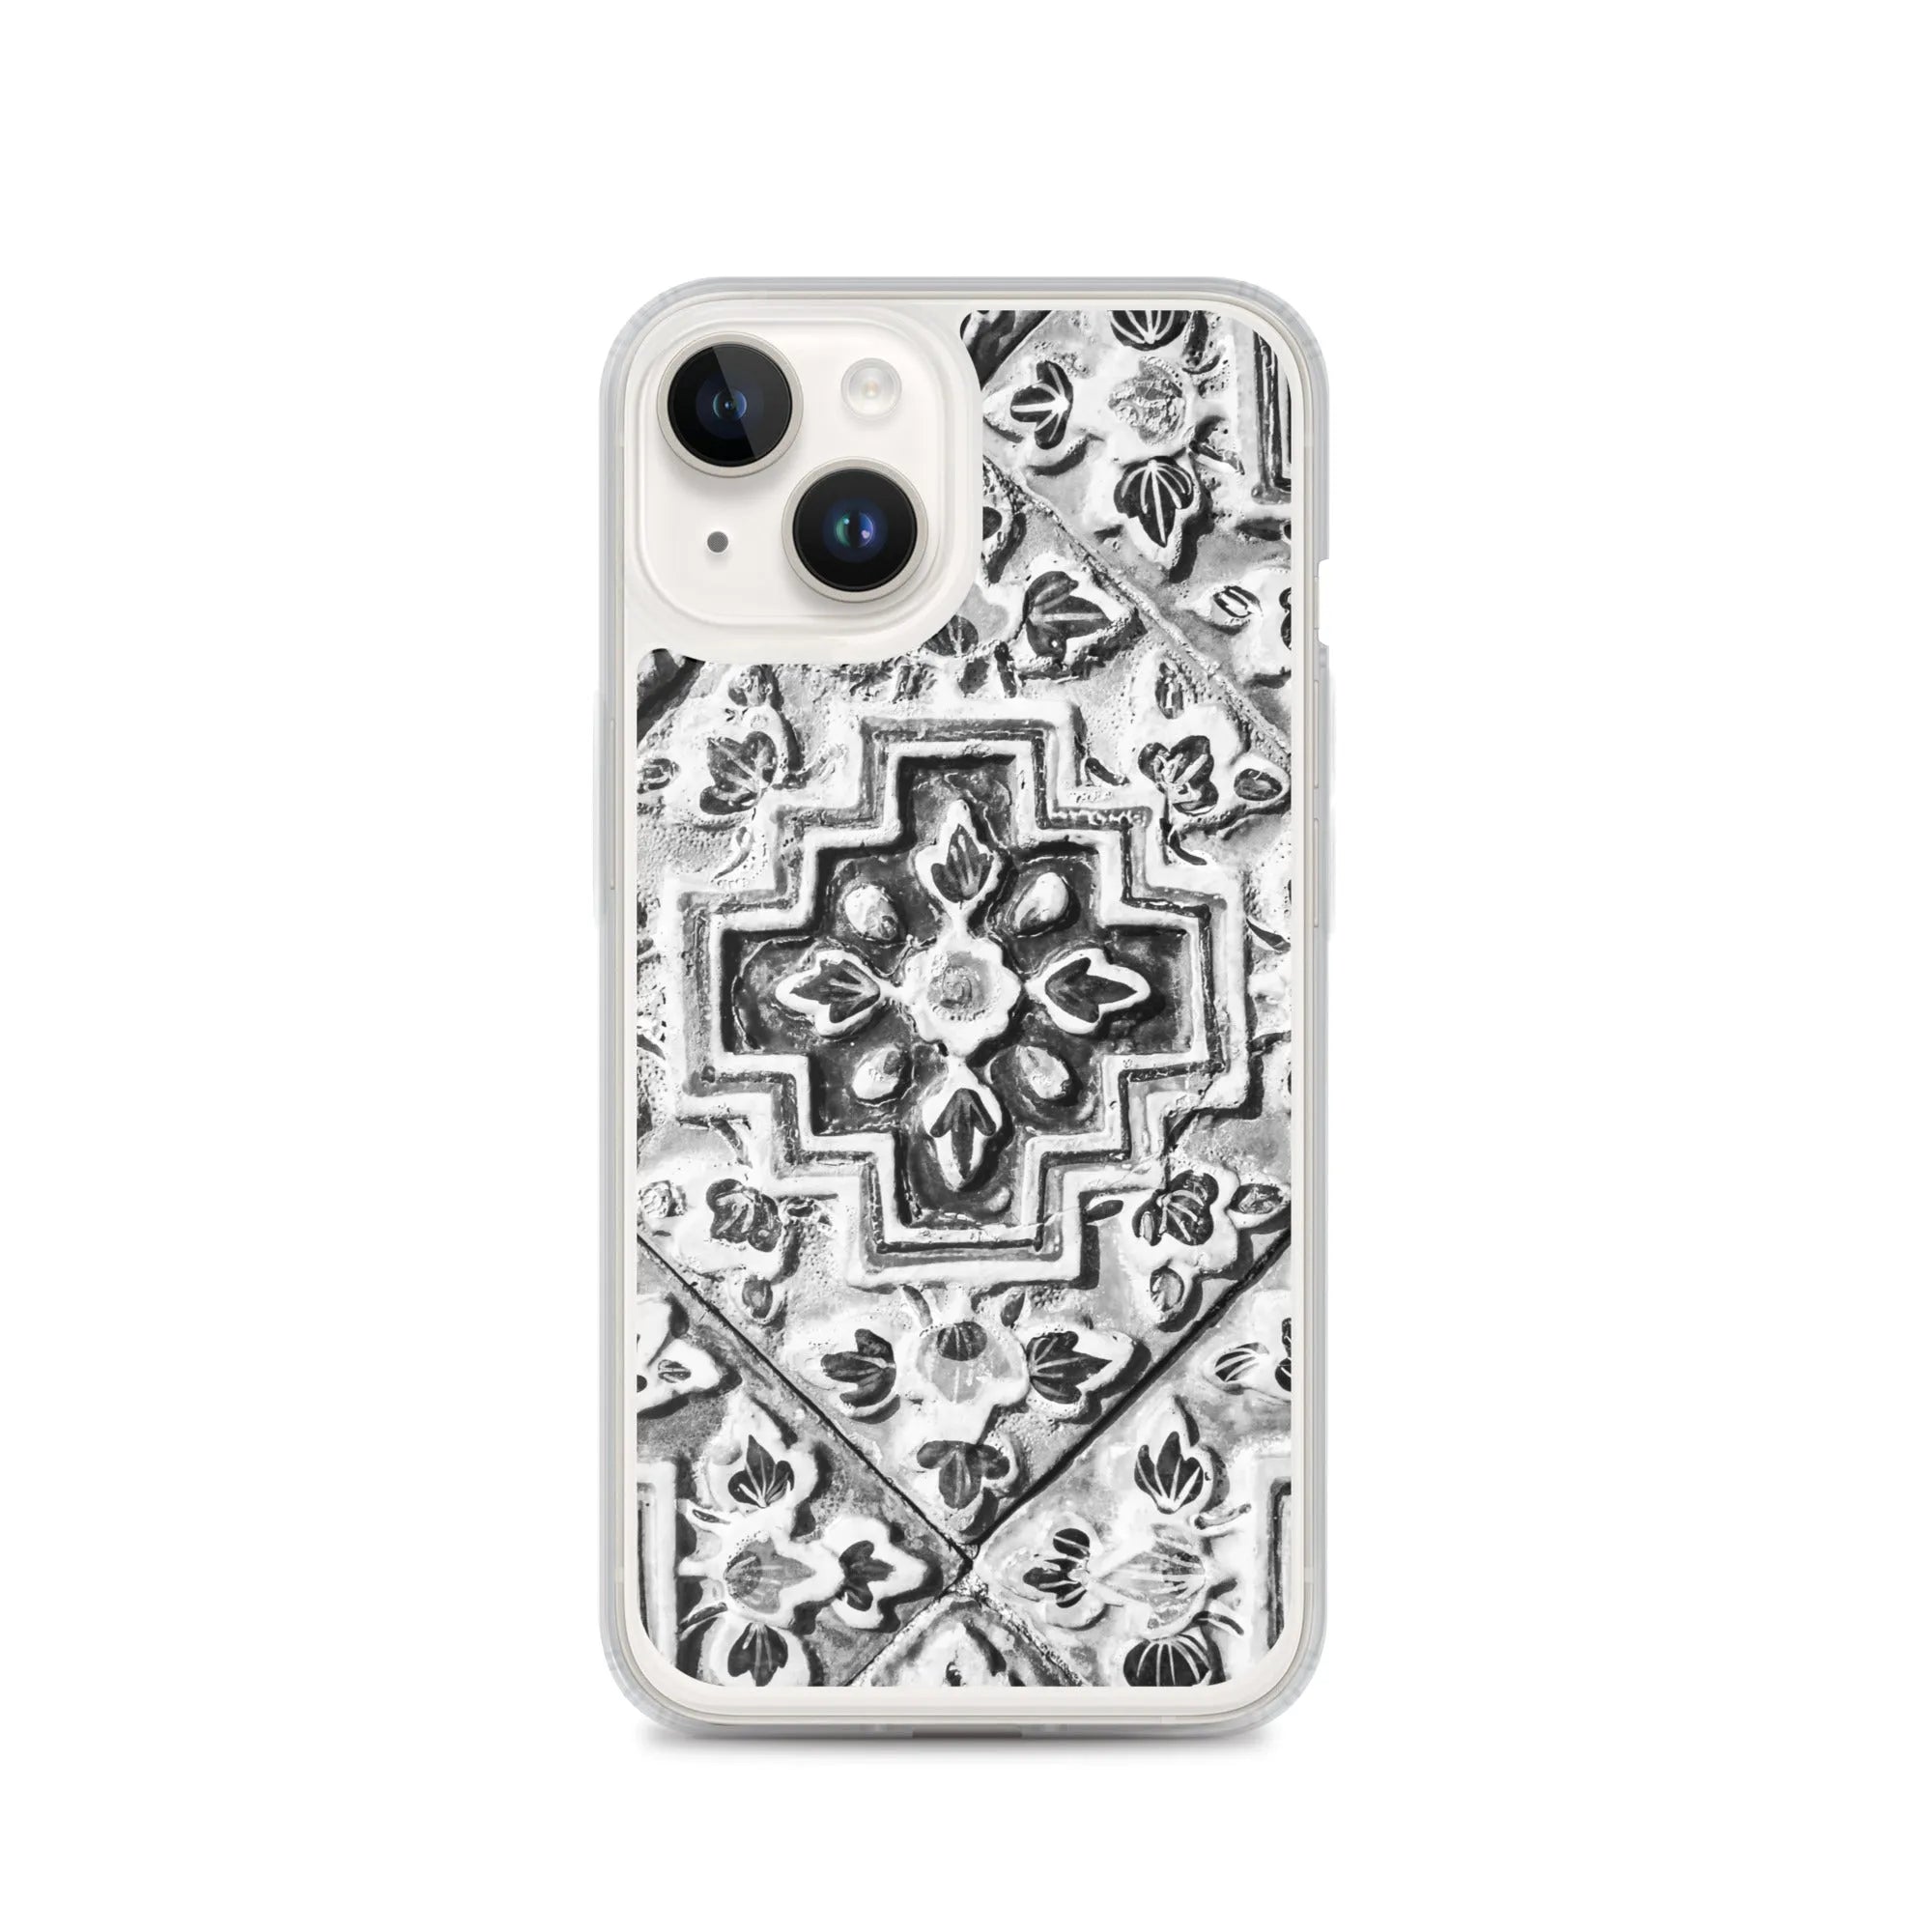 Tactile - Designer Travels Art Iphone Case - Black And White - Iphone 14 - Mobile Phone Cases - Aesthetic Art